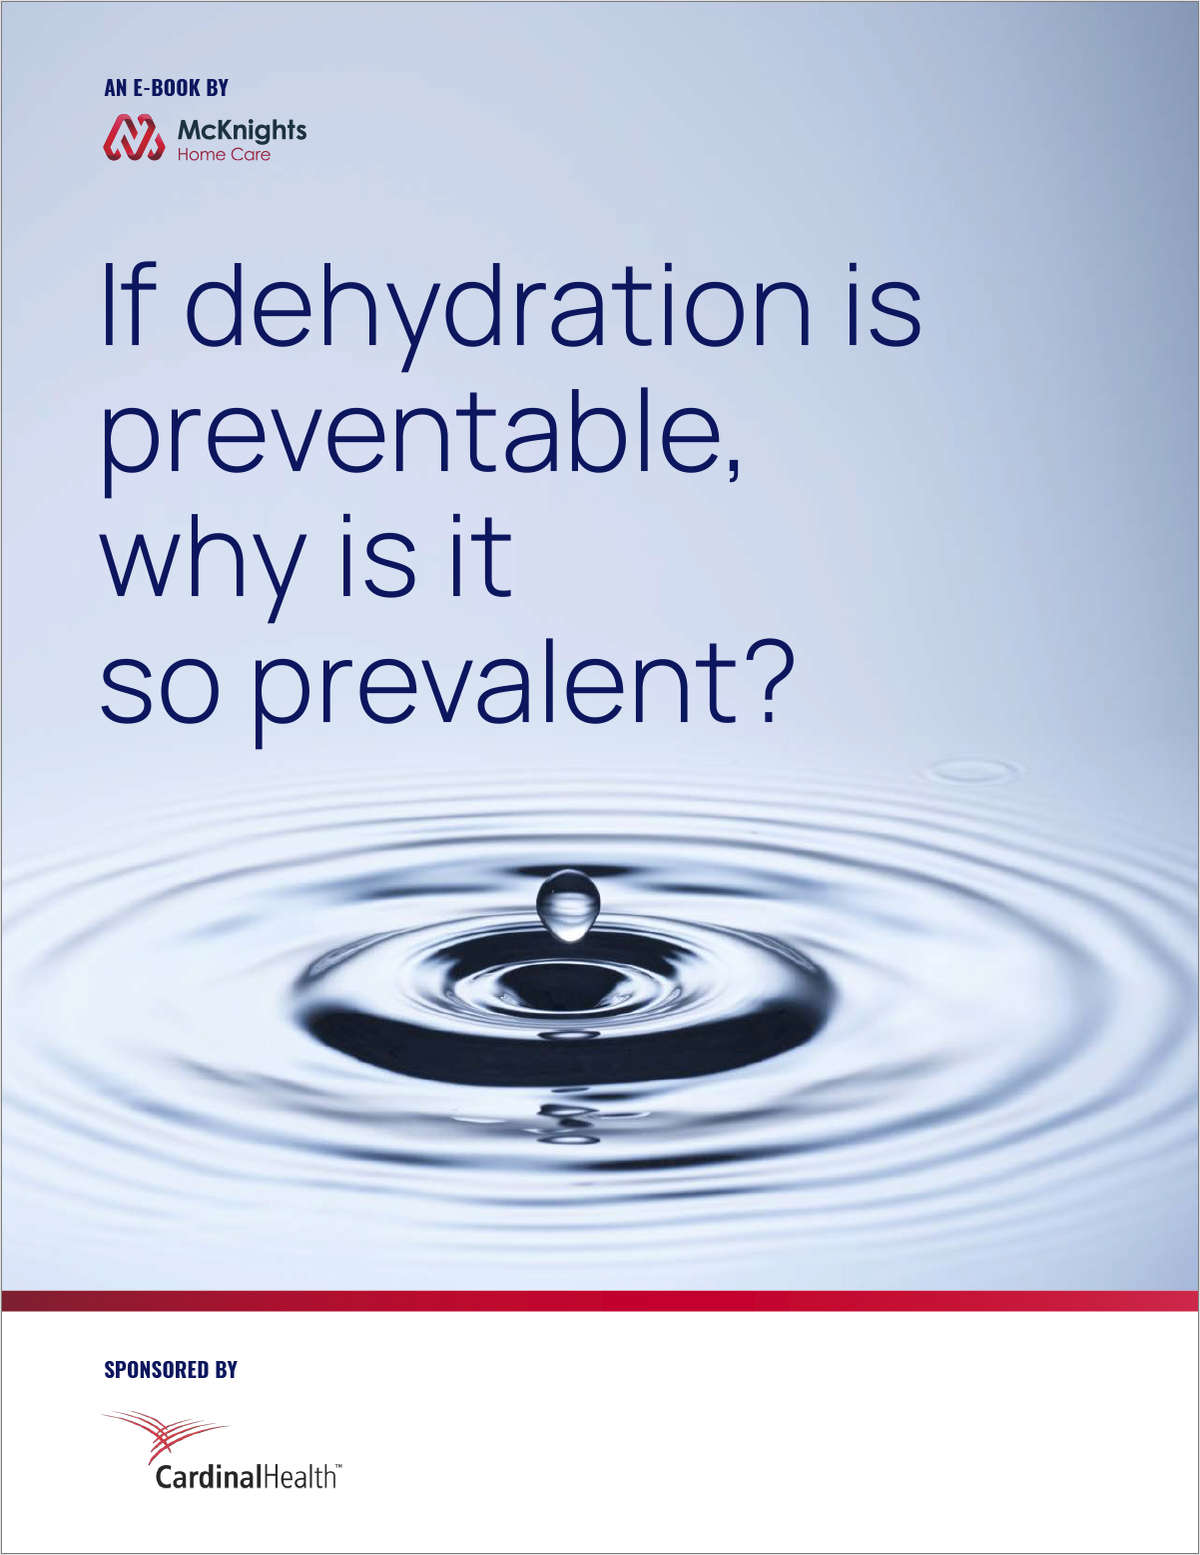 If dehydration is preventable, why is it so prevalent?